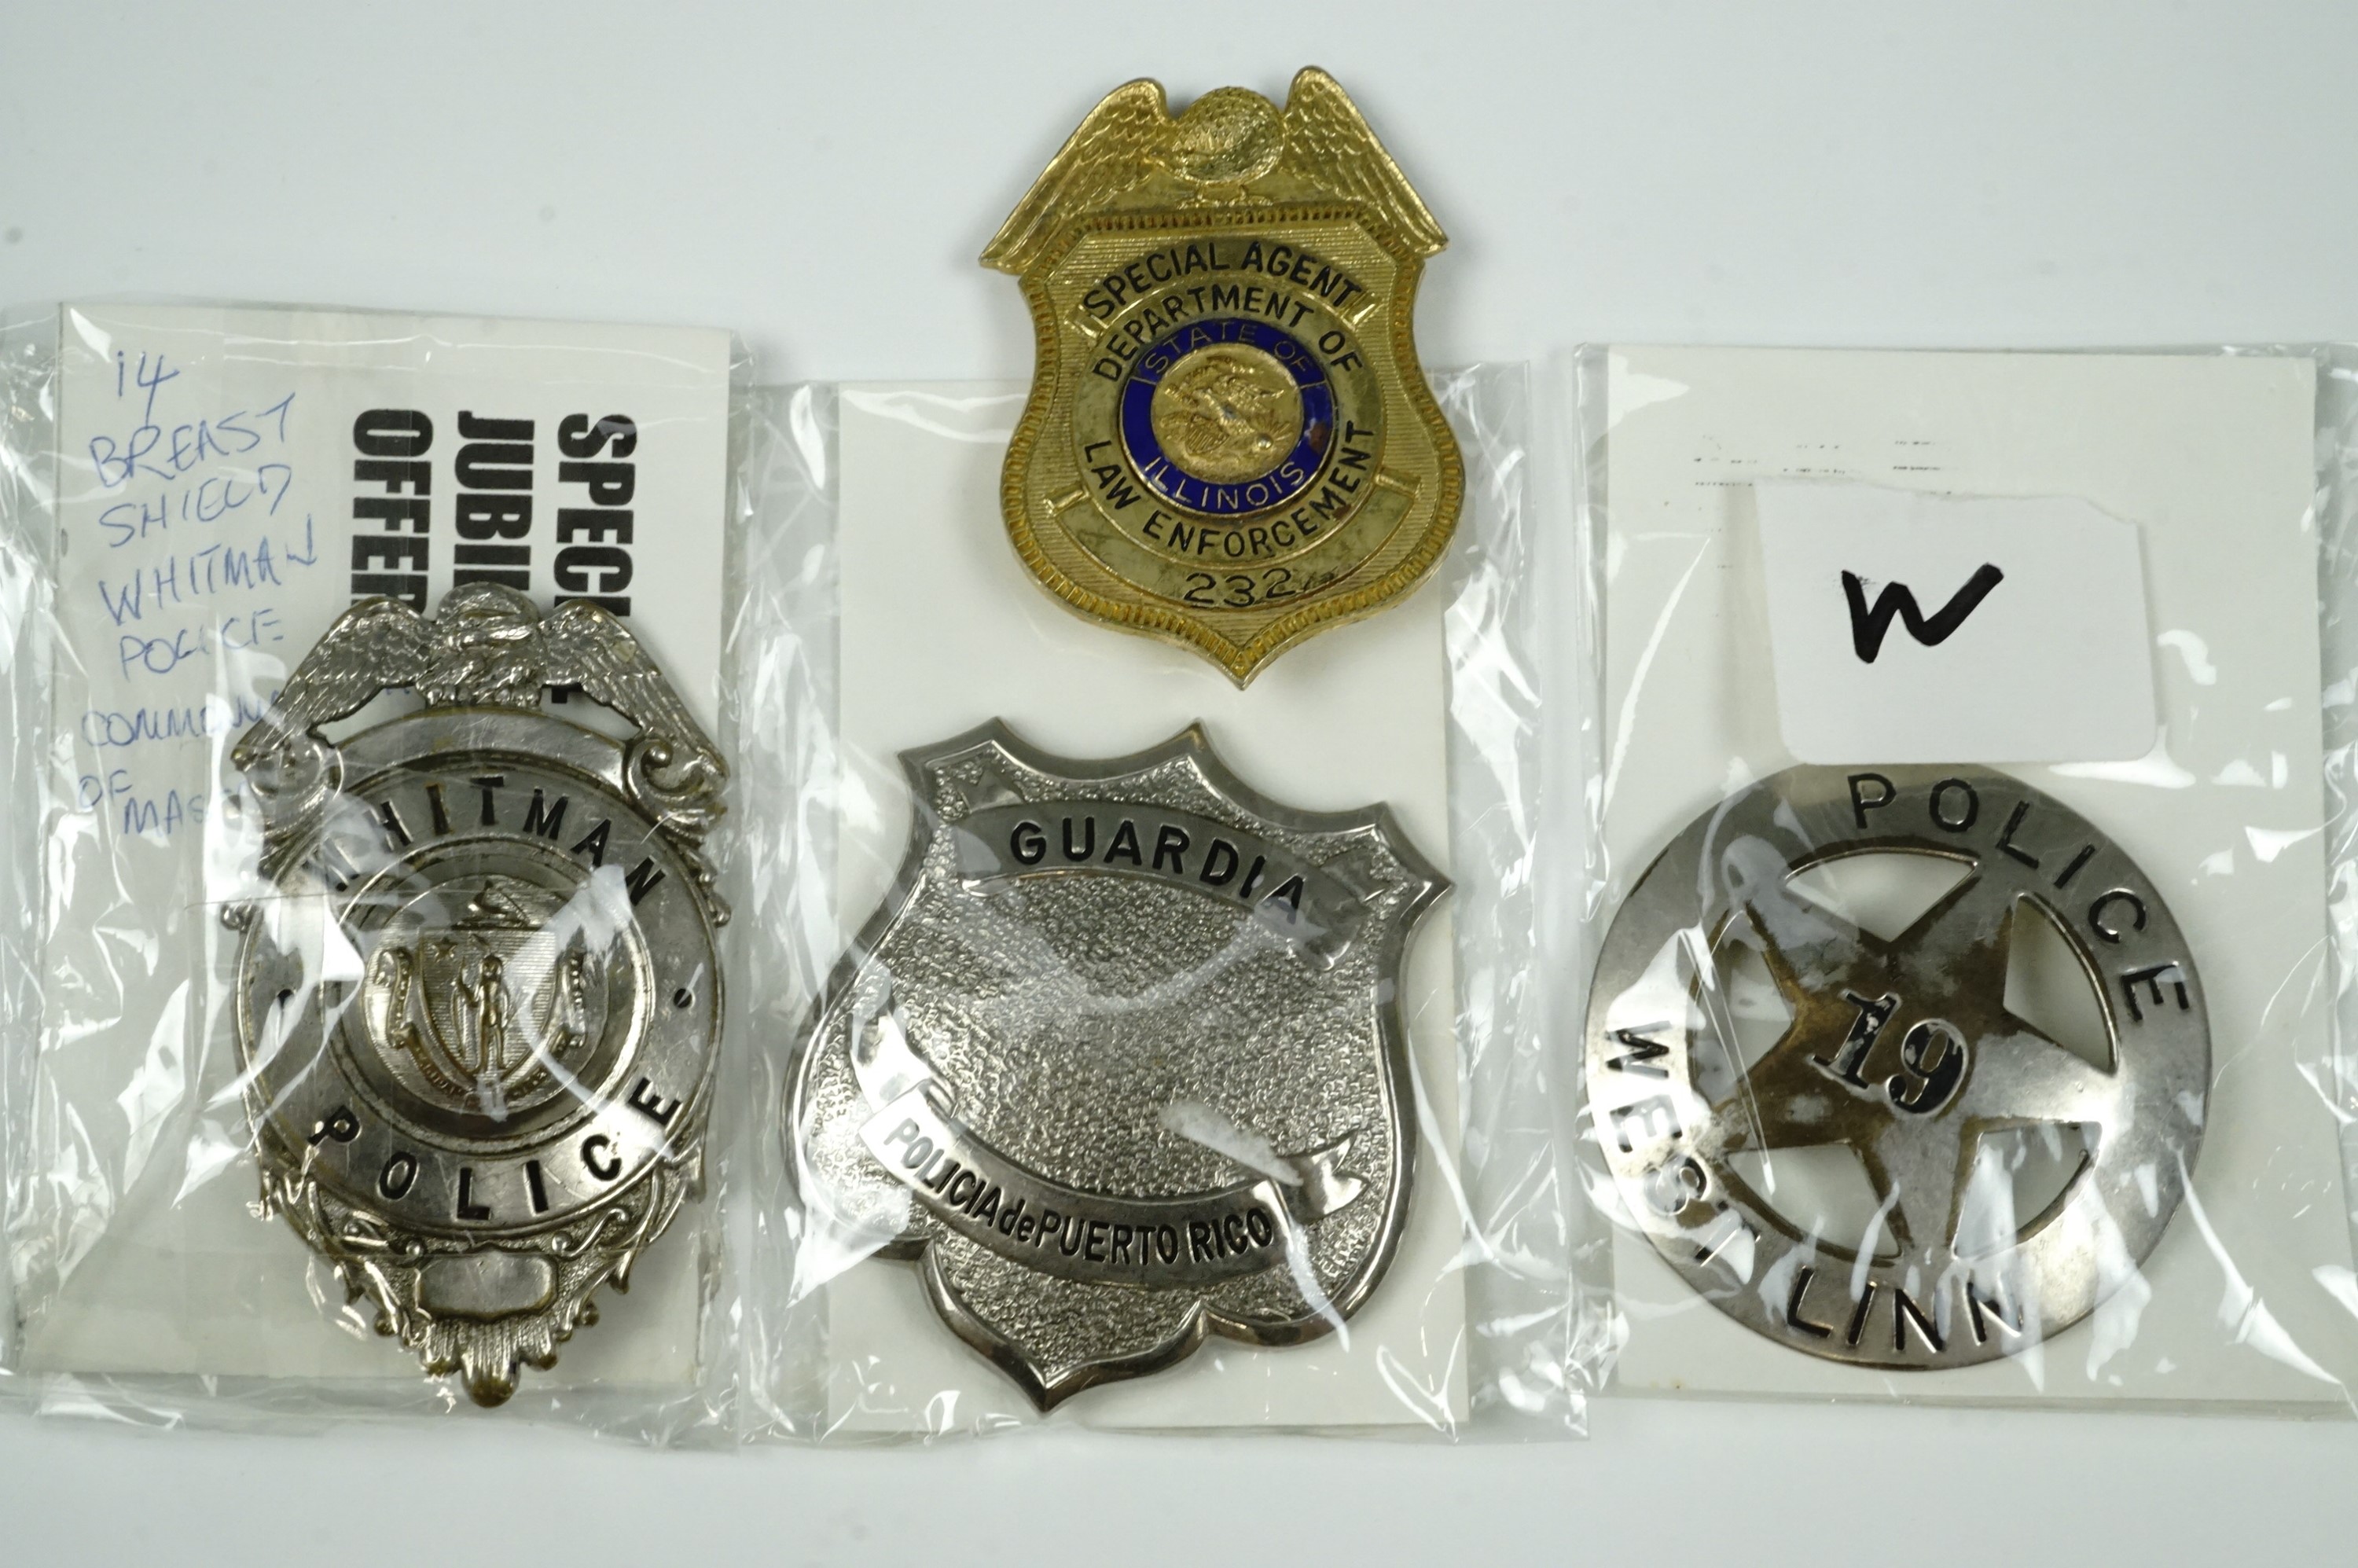 American police breast badges, comprising gilt and enamel Illinois Law Enforcement Special Agent,